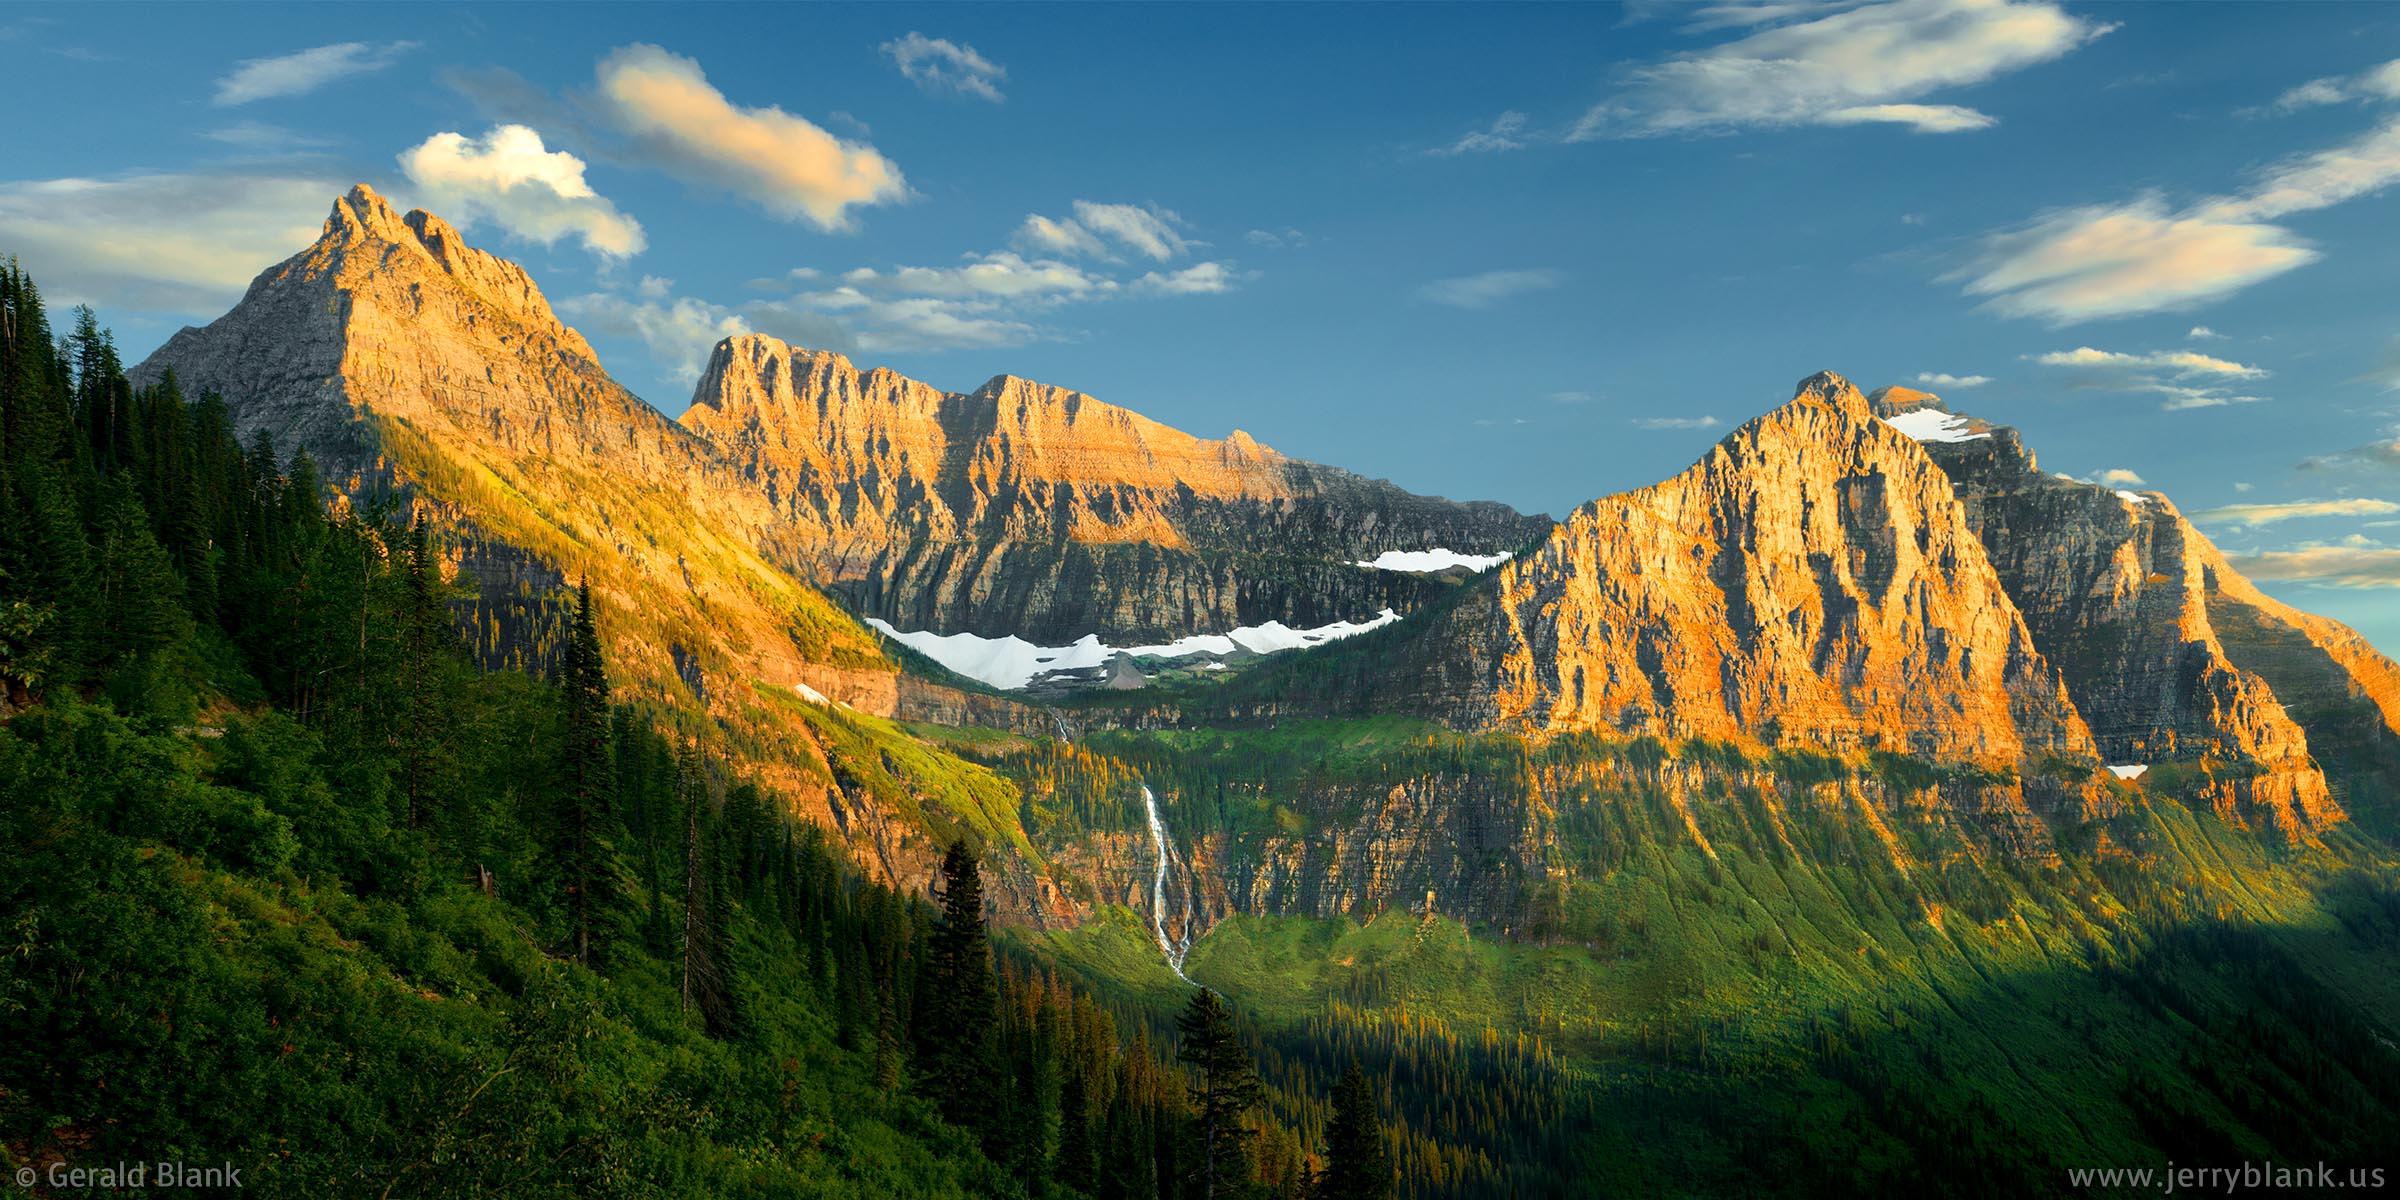 #26132 - The last rays of sunlight illuminate Mount Oberlin, Clements Mountain, Bird Woman Falls, and Mount Cannon, in Glacier National Park, Montana - photo by Jerry Blank